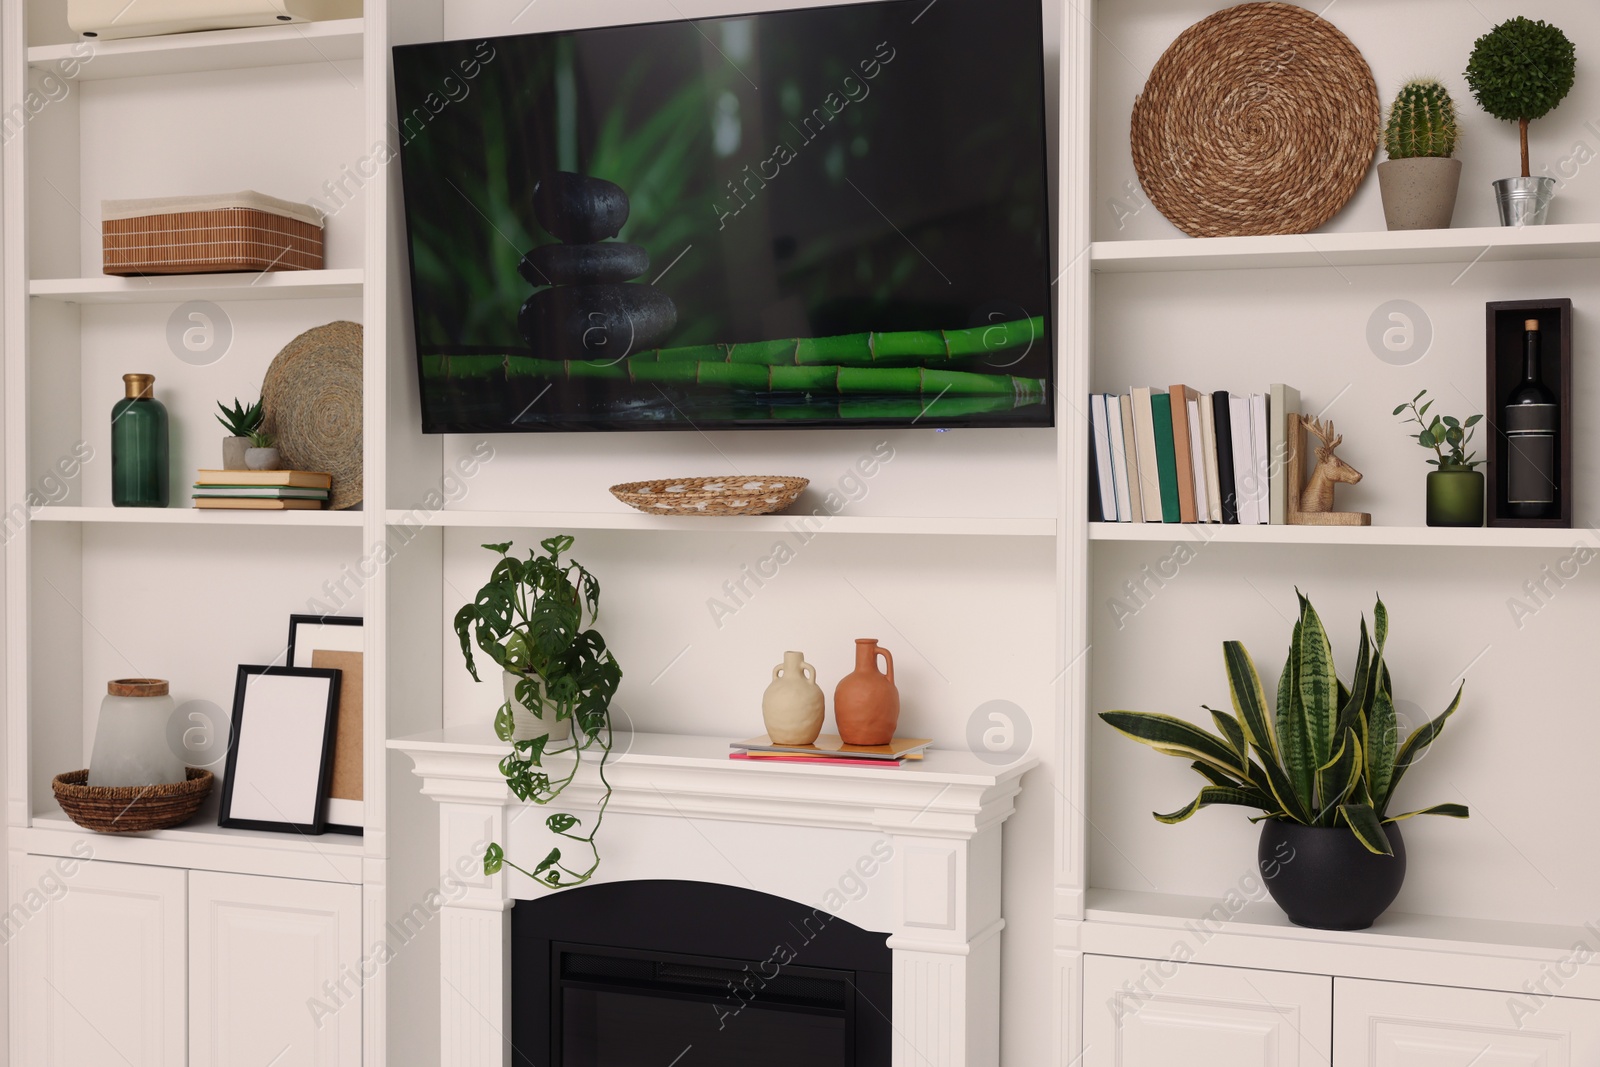 Photo of TV and shelves with different decor and houseplants in room. Interior design